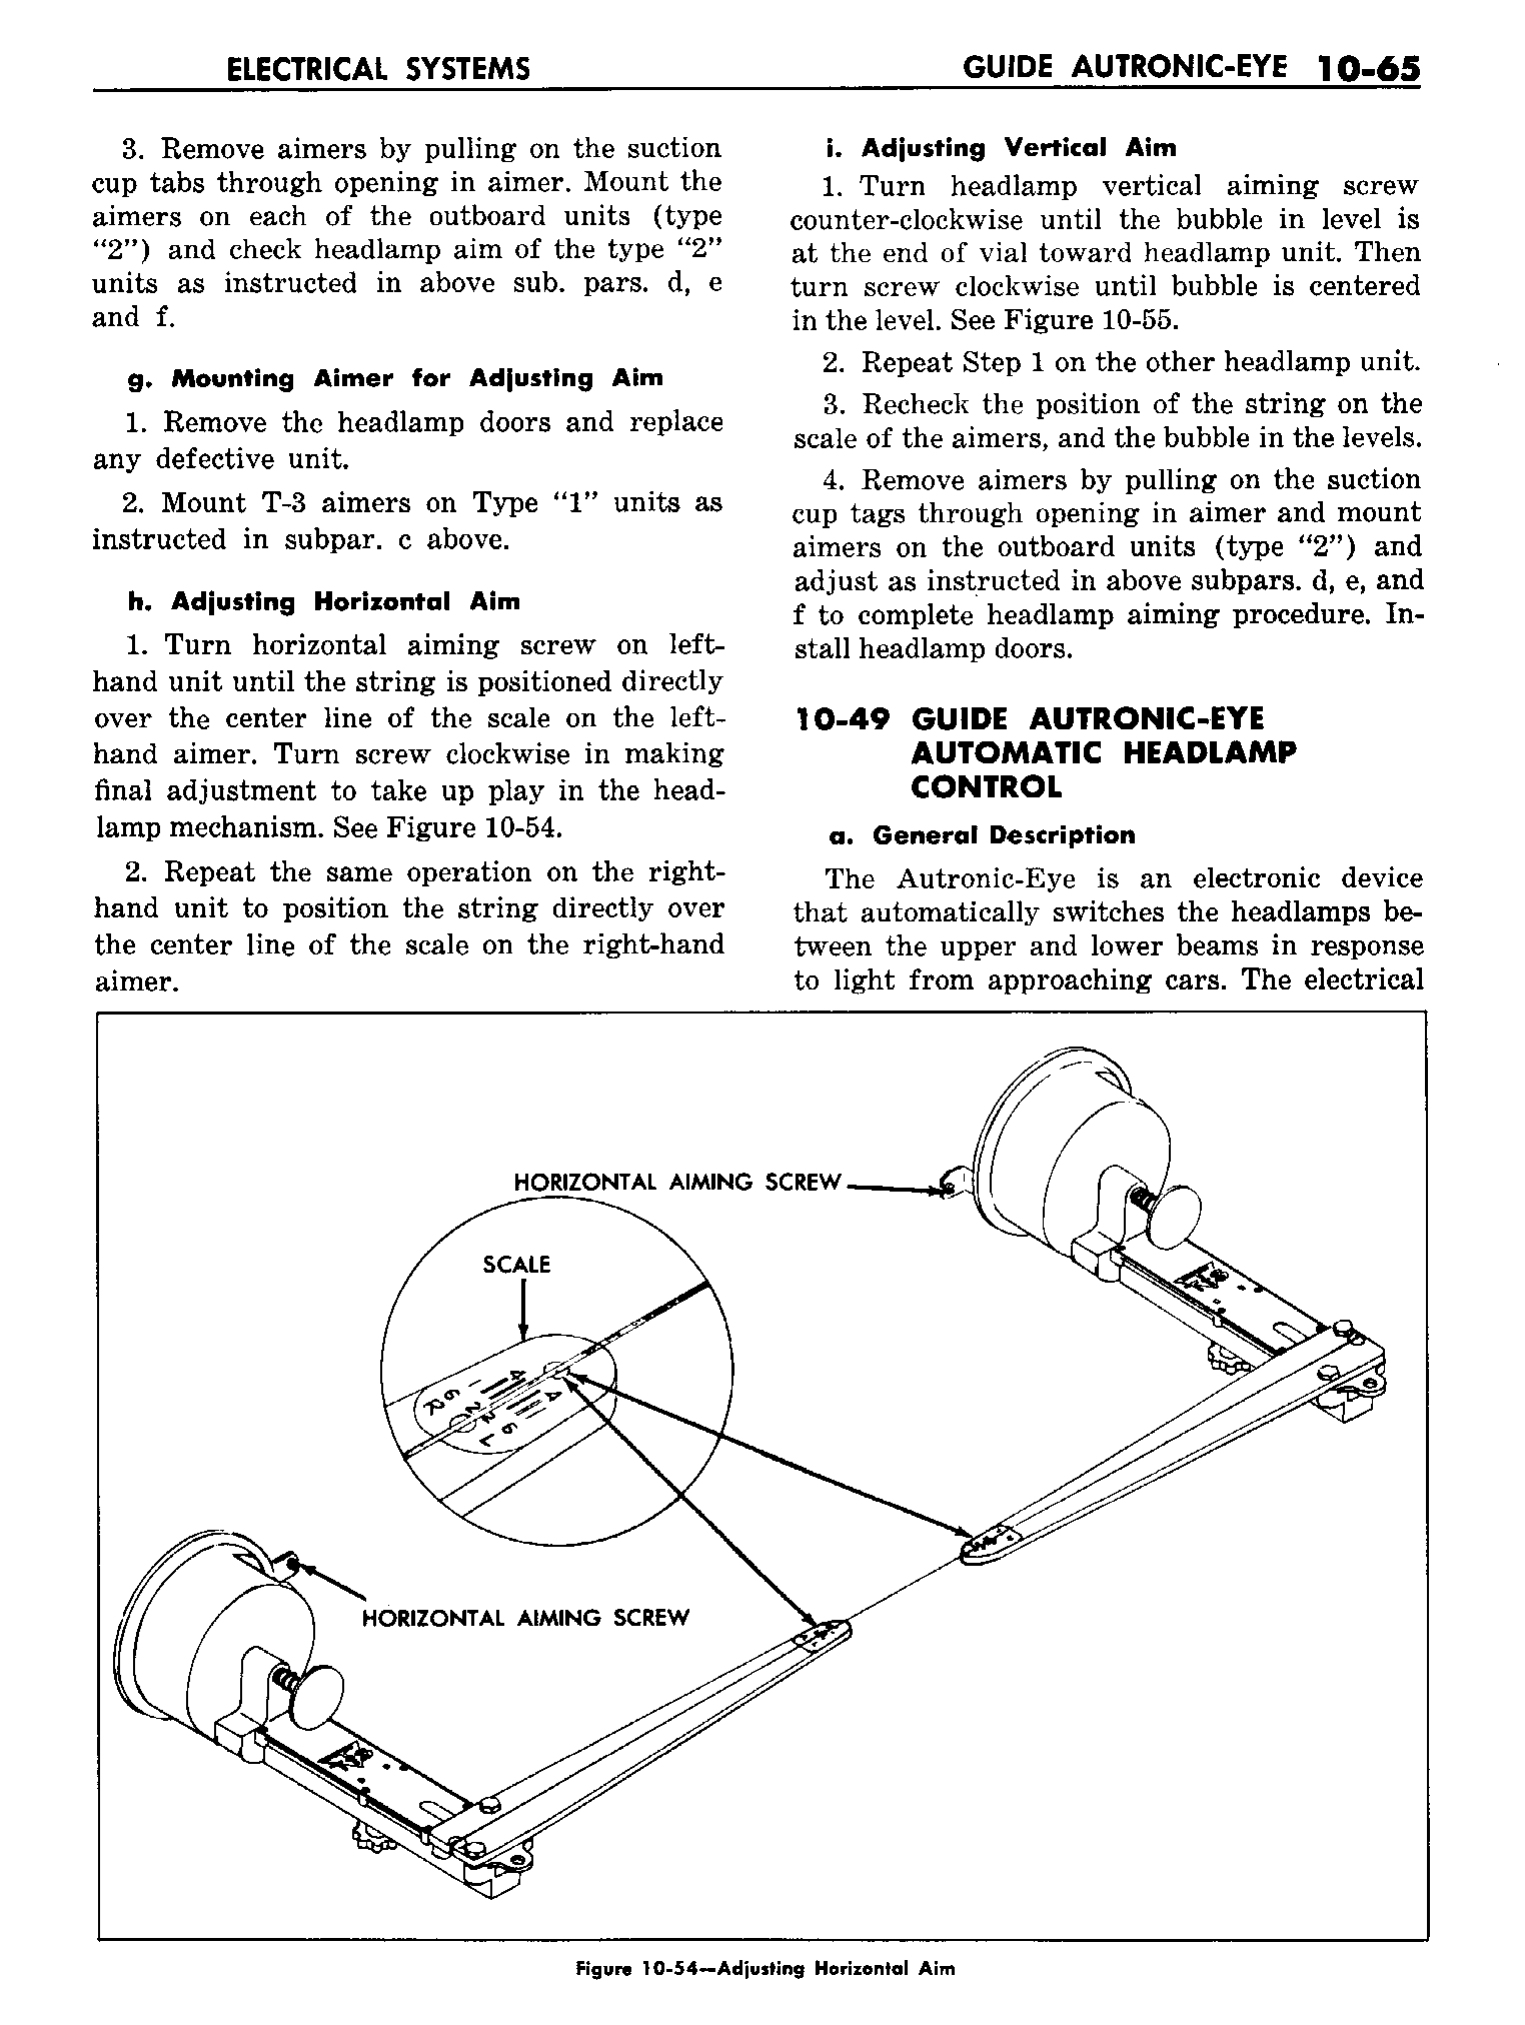 n_11 1958 Buick Shop Manual - Electrical Systems_65.jpg